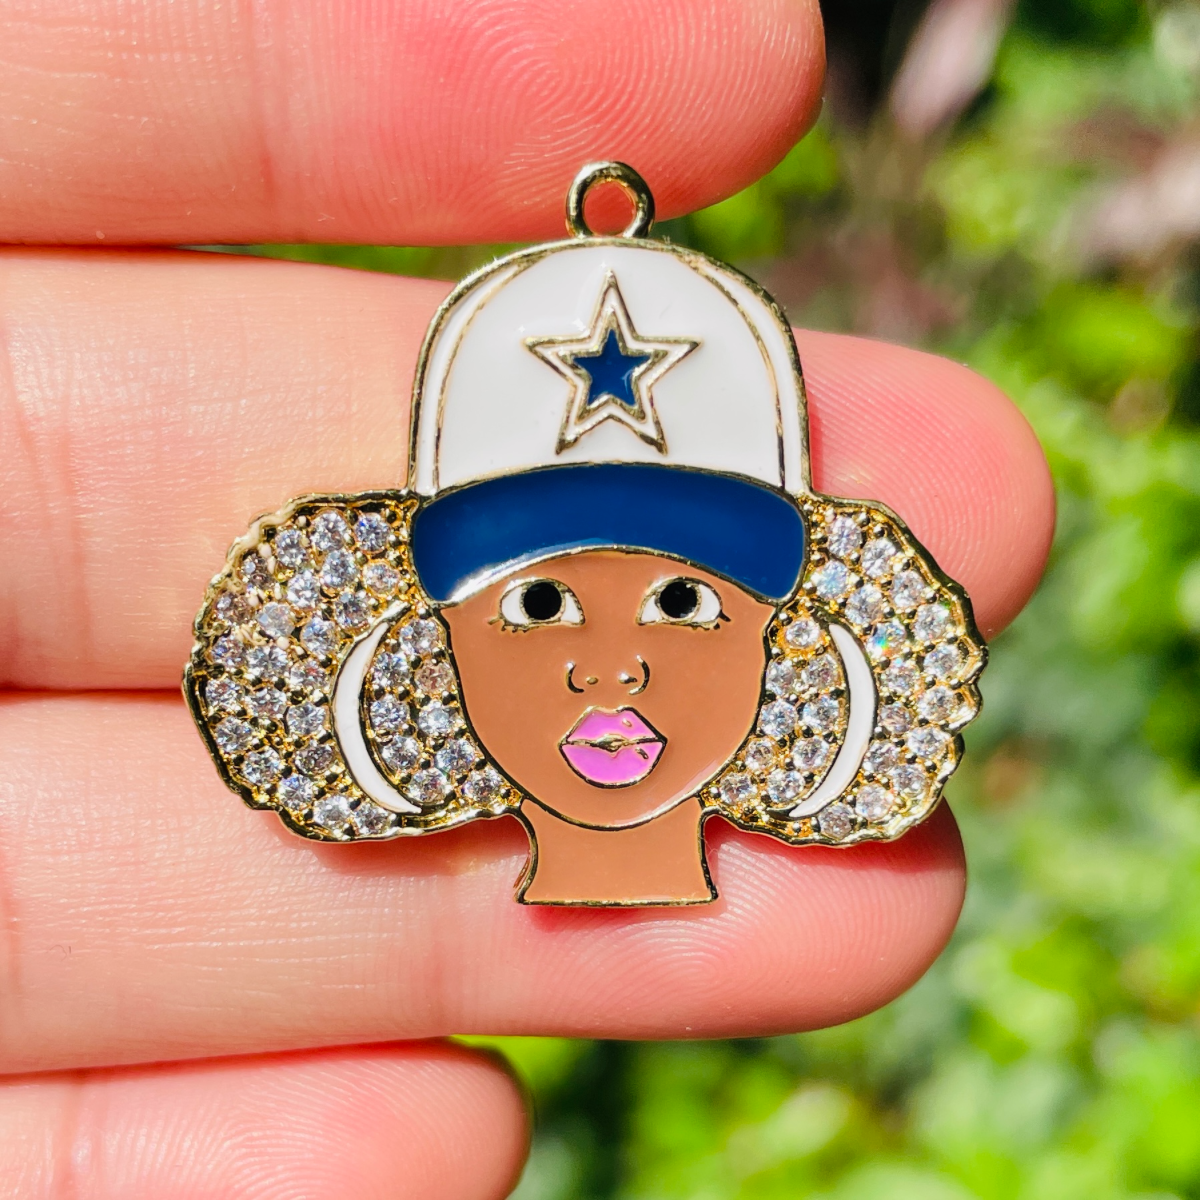 10pcs/lot 32.8*29.5mm CZ Paved Cowboys Black Girl Charms Gold CZ Paved Charms Afro Girl/Queen Charms American Football Sports New Charms Arrivals Charms Beads Beyond